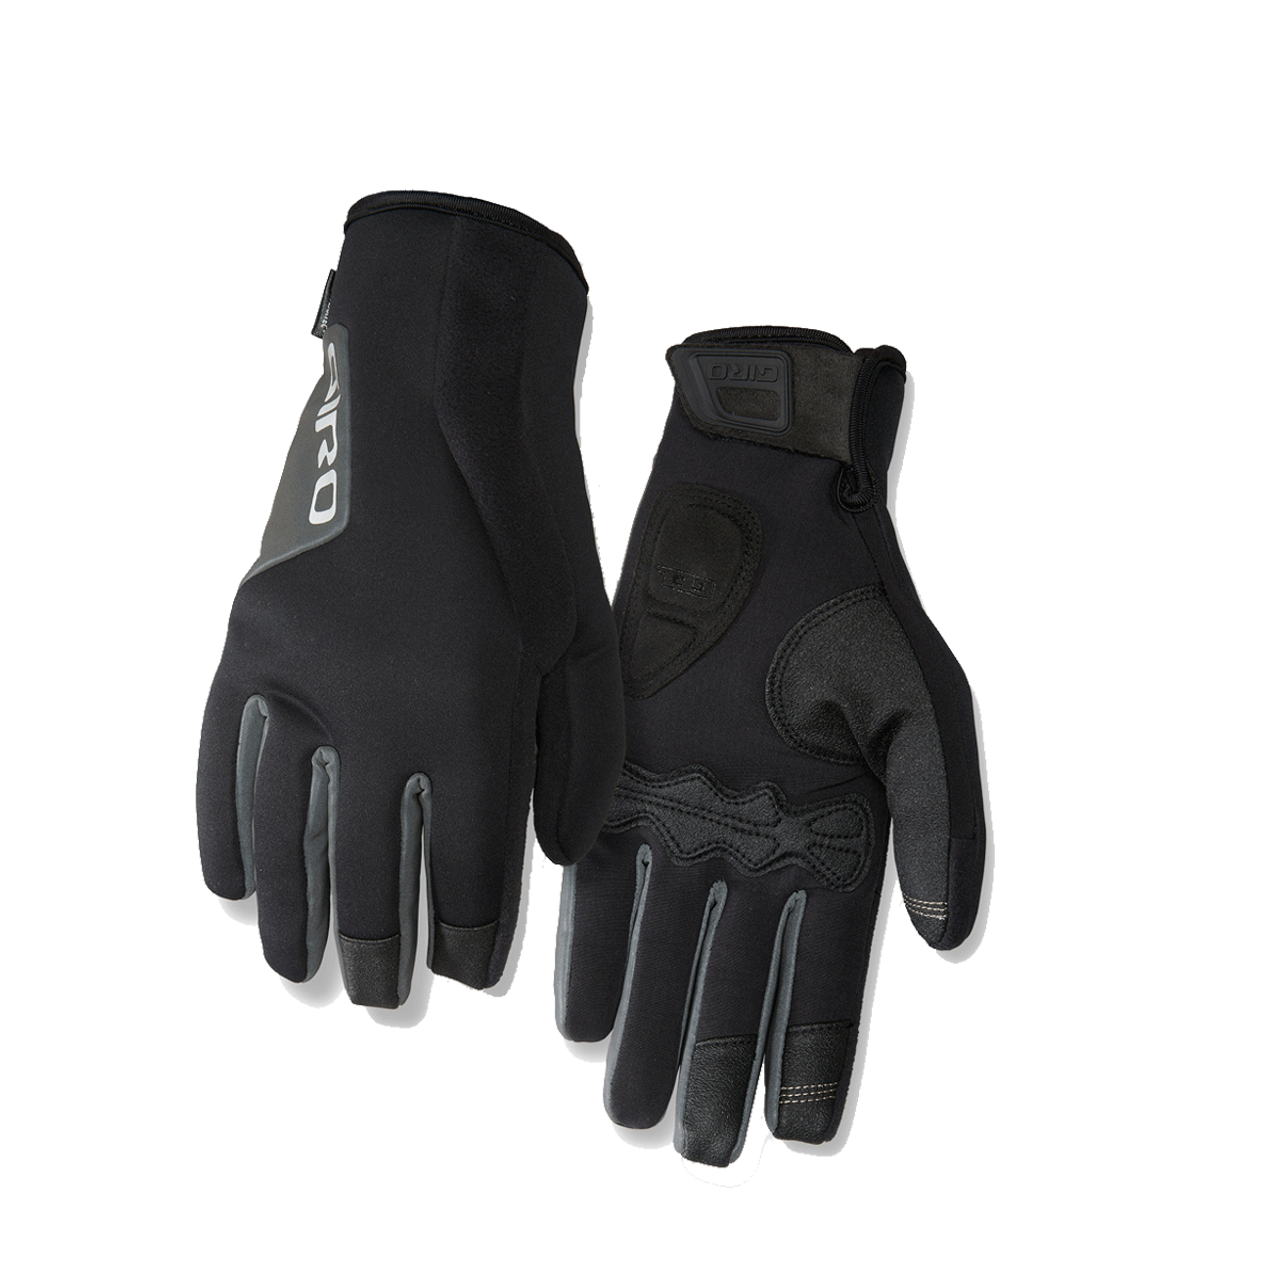 Giro Ambient 2.0 Adults Water/Wind Resistant Breathable Soft Shell Gloves -Black